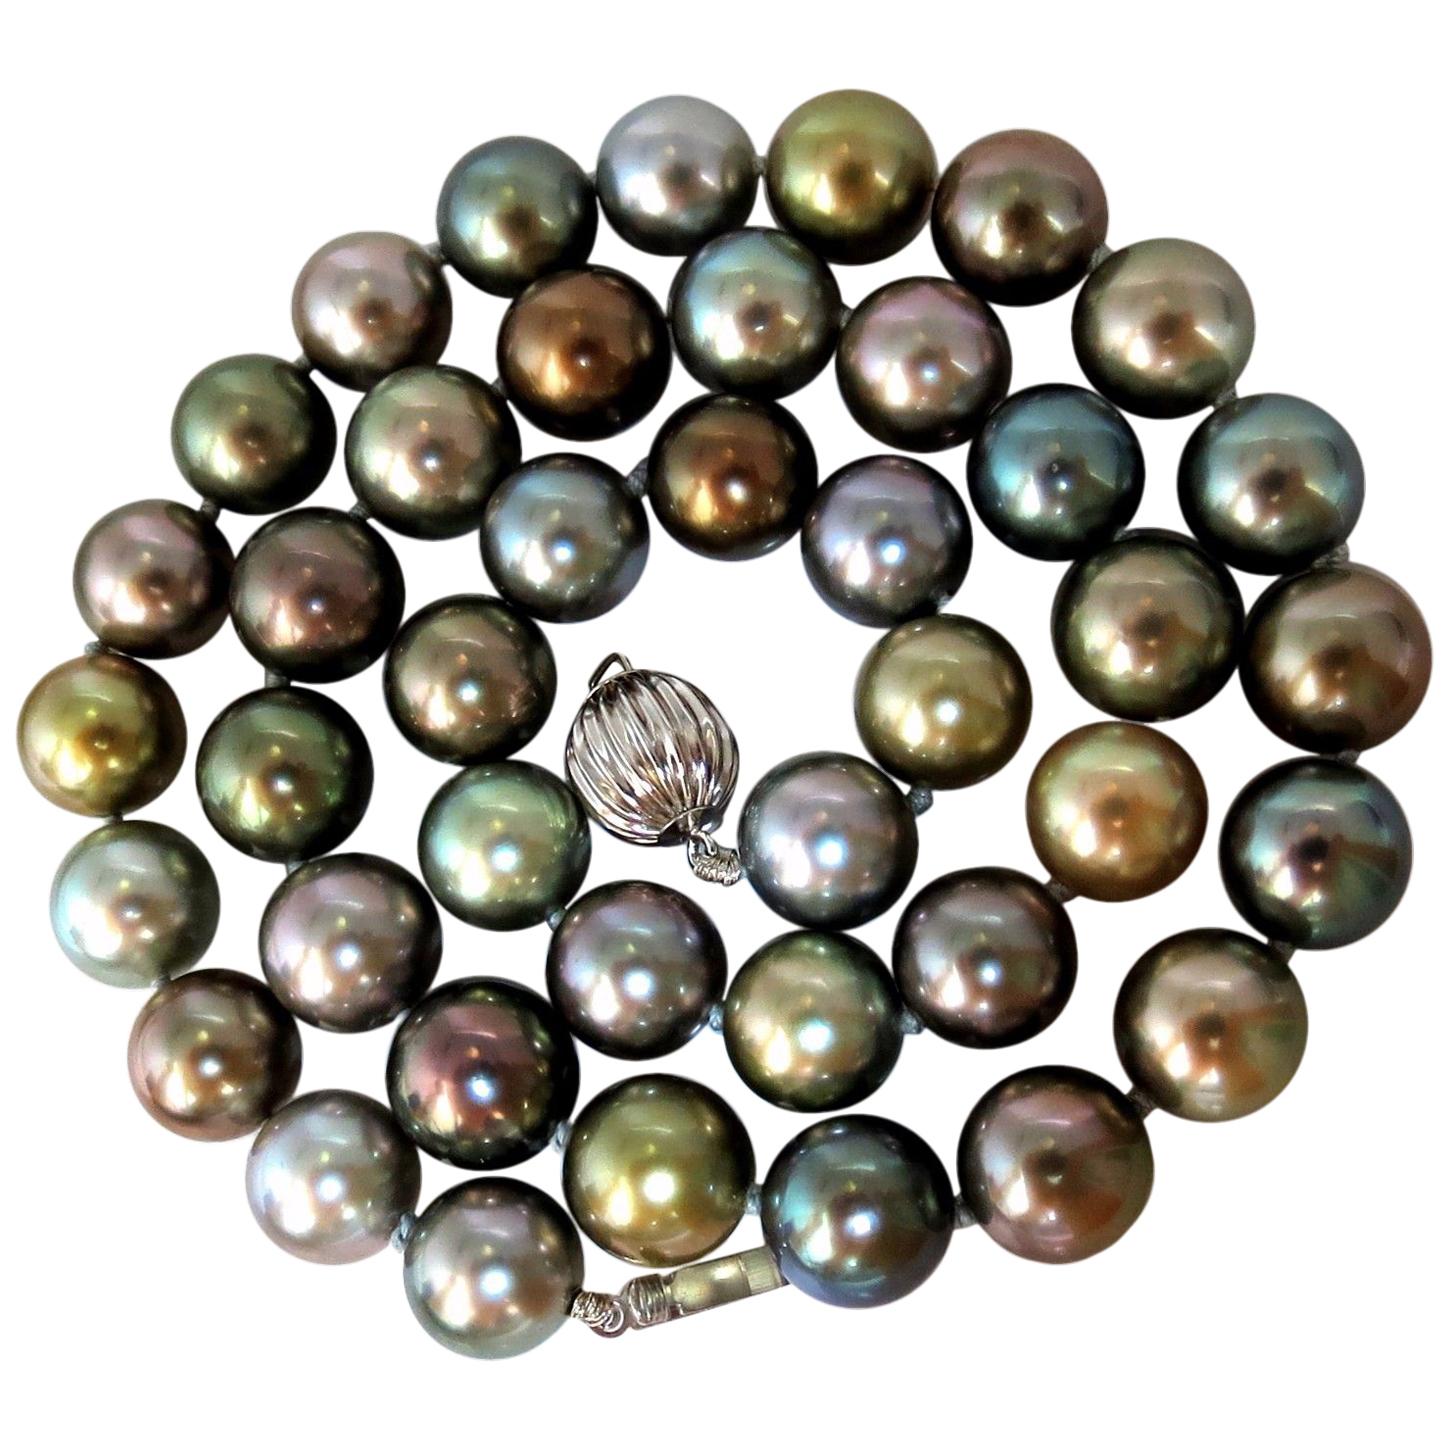 What is the best color for Tahitian pearls?